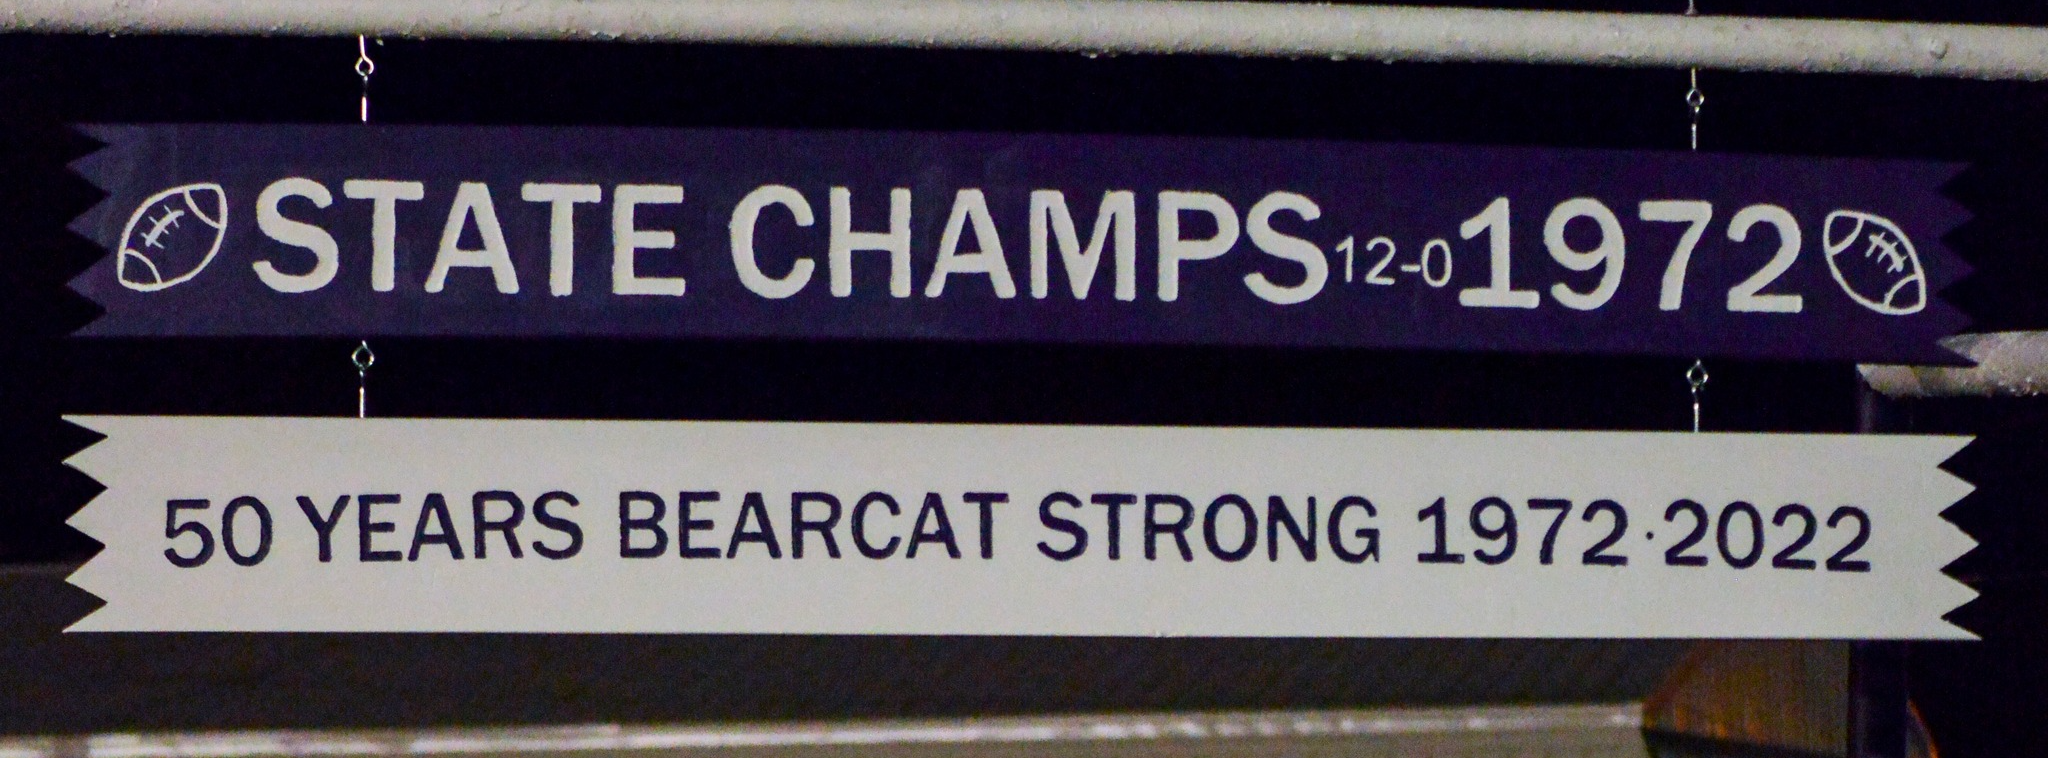 State Champs 12-0 1972 50 years bearcat strong 1972-2022